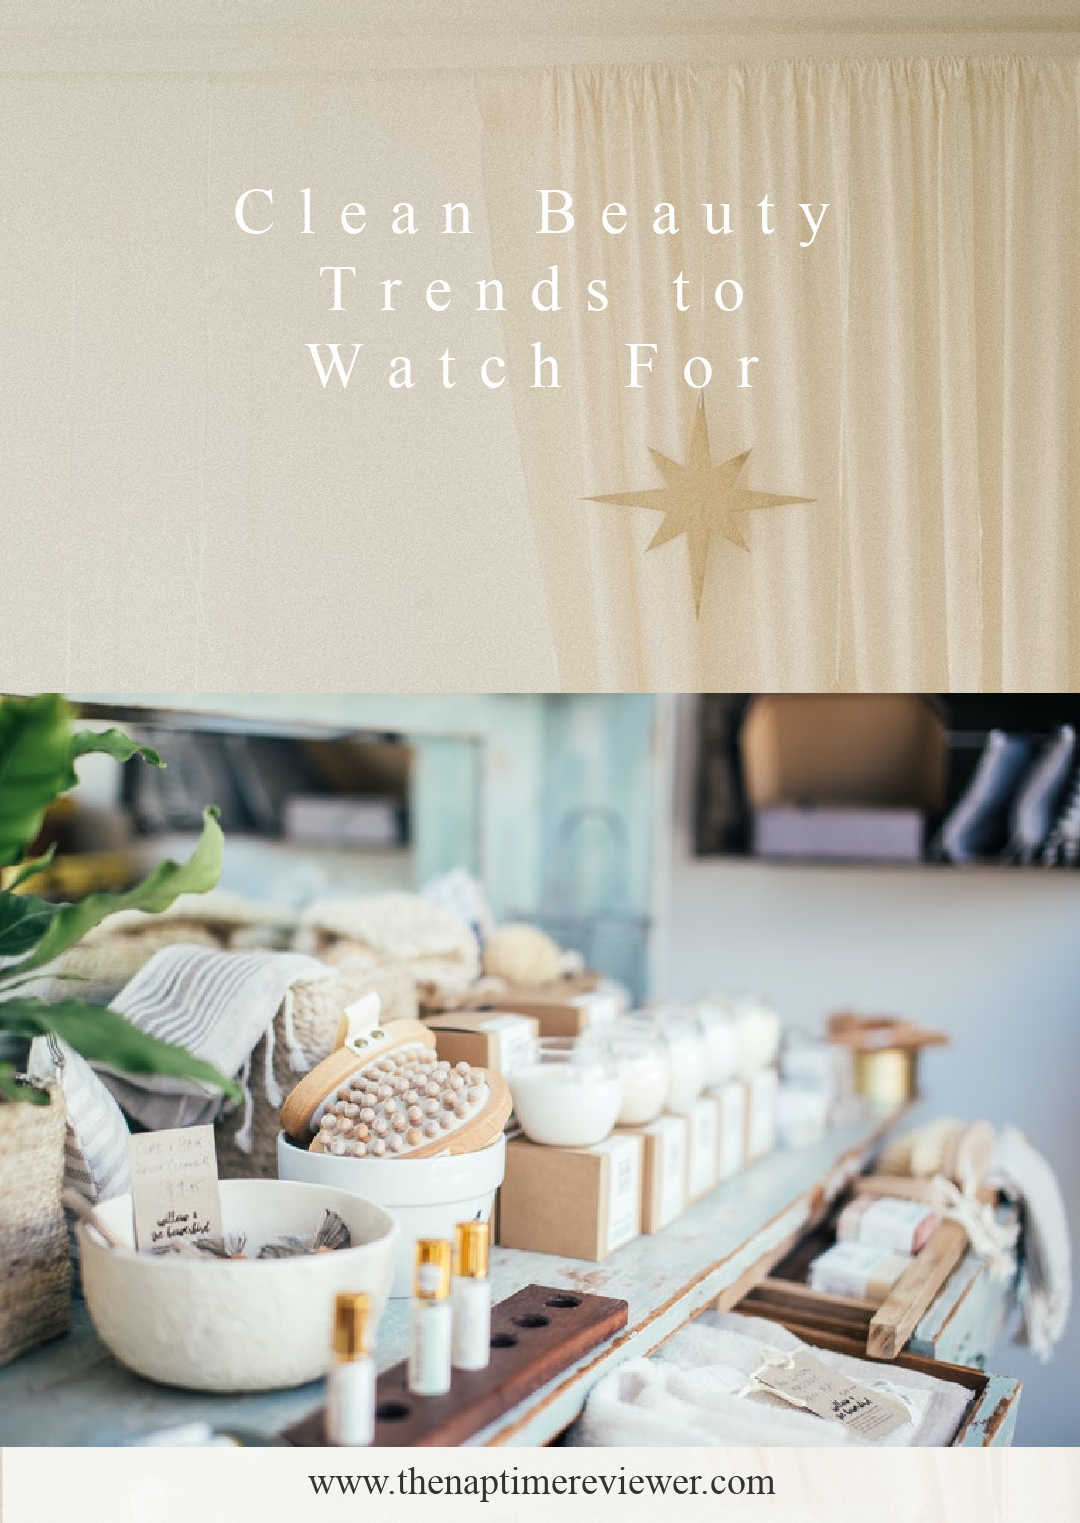 Clean Beauty Trends to Watch For